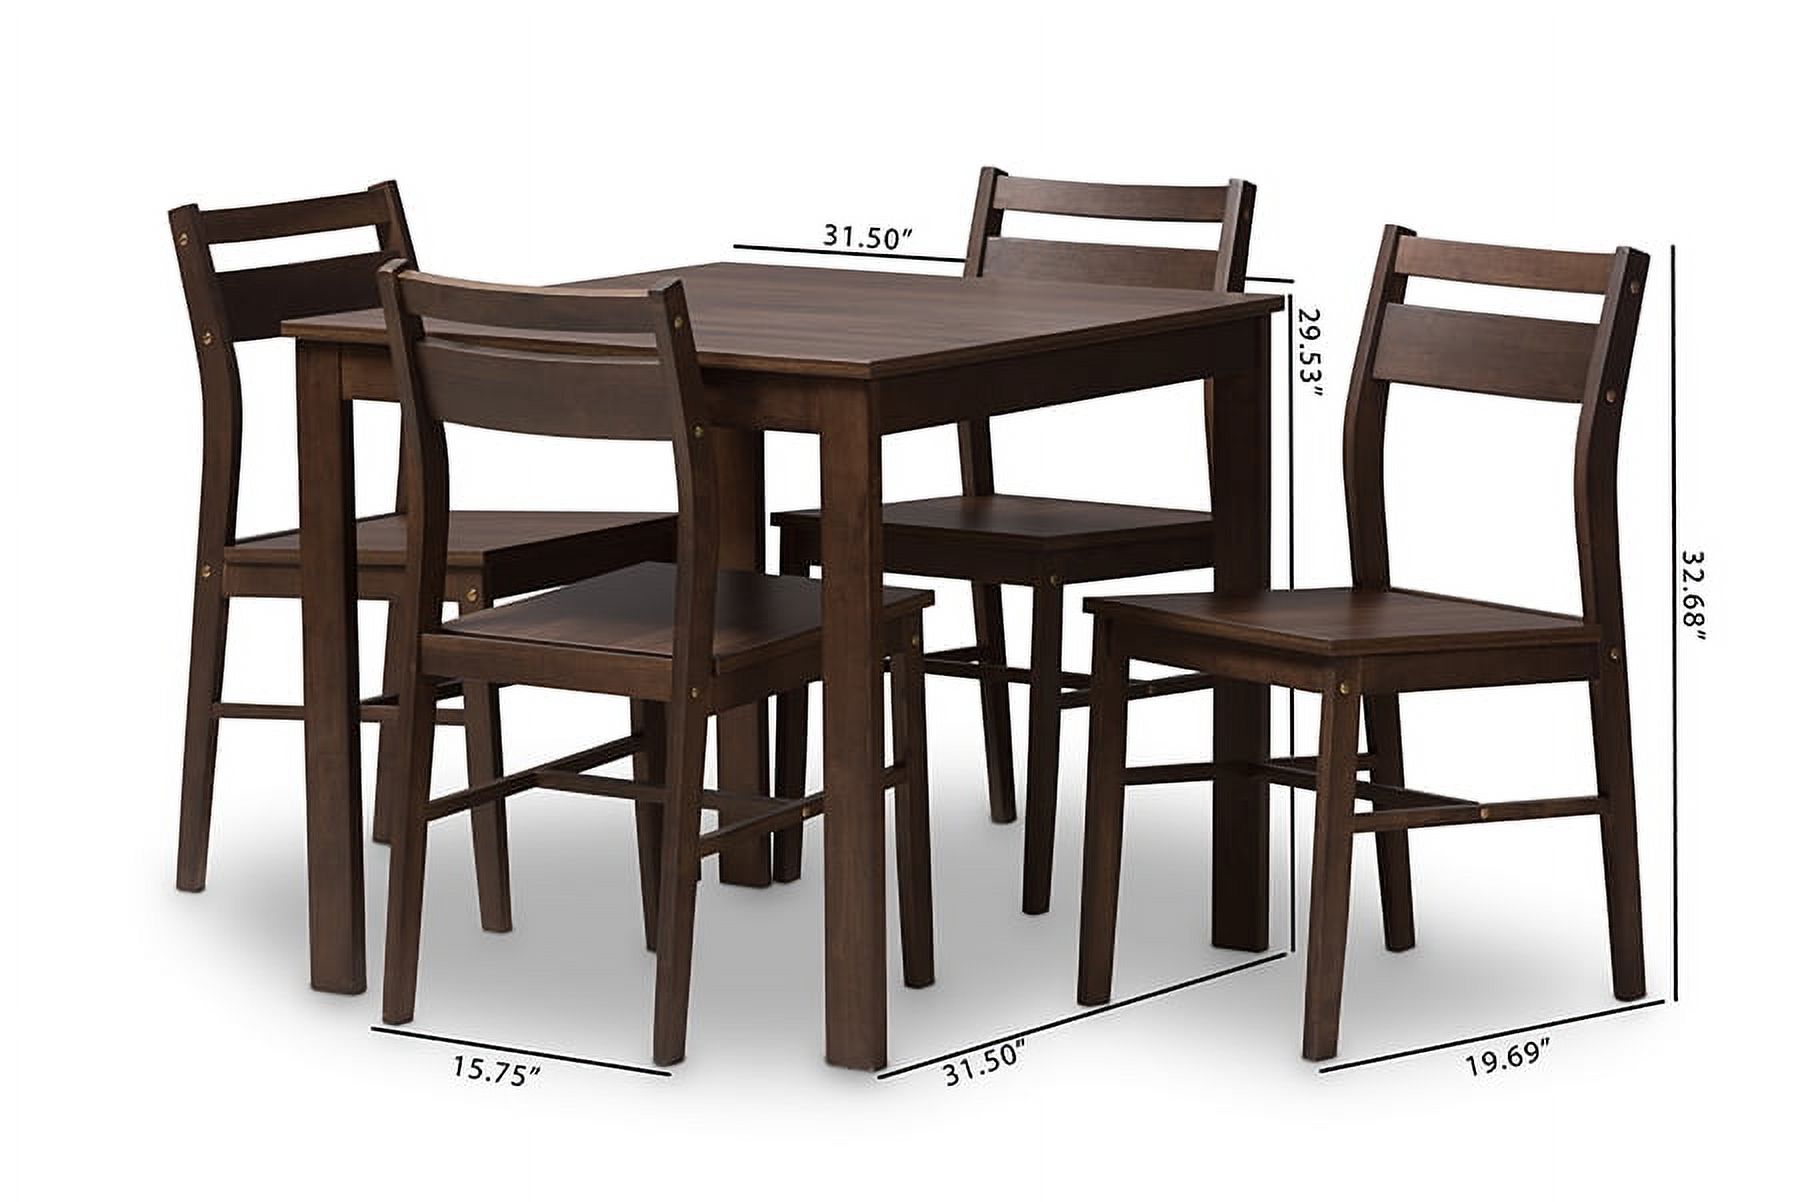 Baxton Studio Lovy Modern and Contemporary Walnut-Finished 5-Piece Dining Set - image 2 of 6